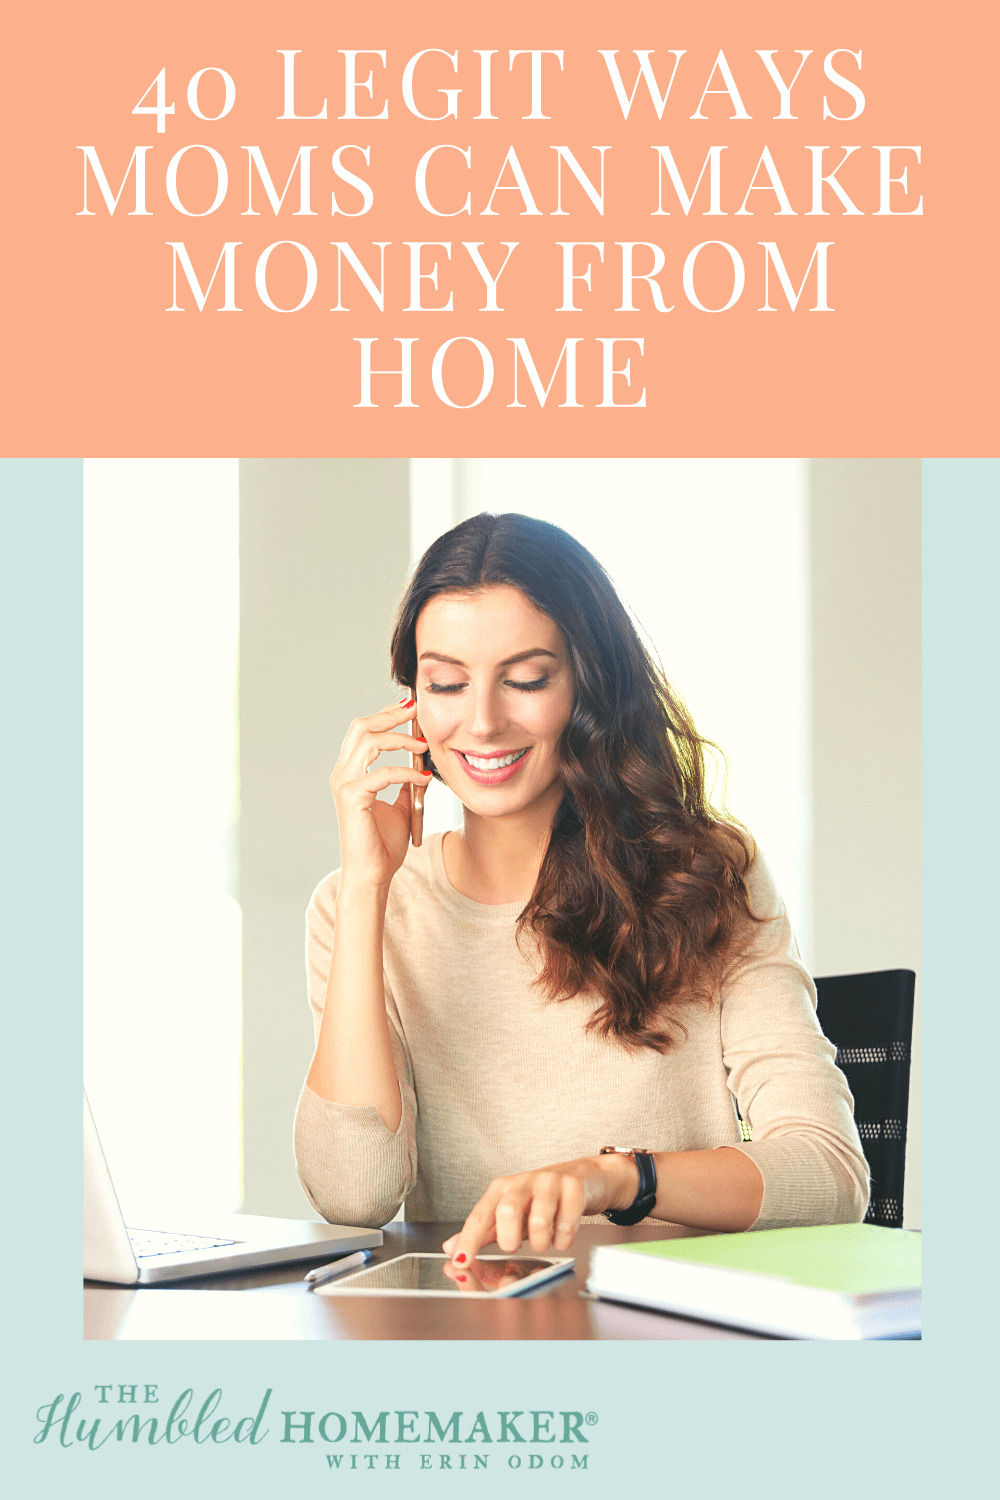 Think you can't make money from home? Think again! Whether you're looking to make a little extra change or a full-time income, there are legit ways moms can make money from home! 